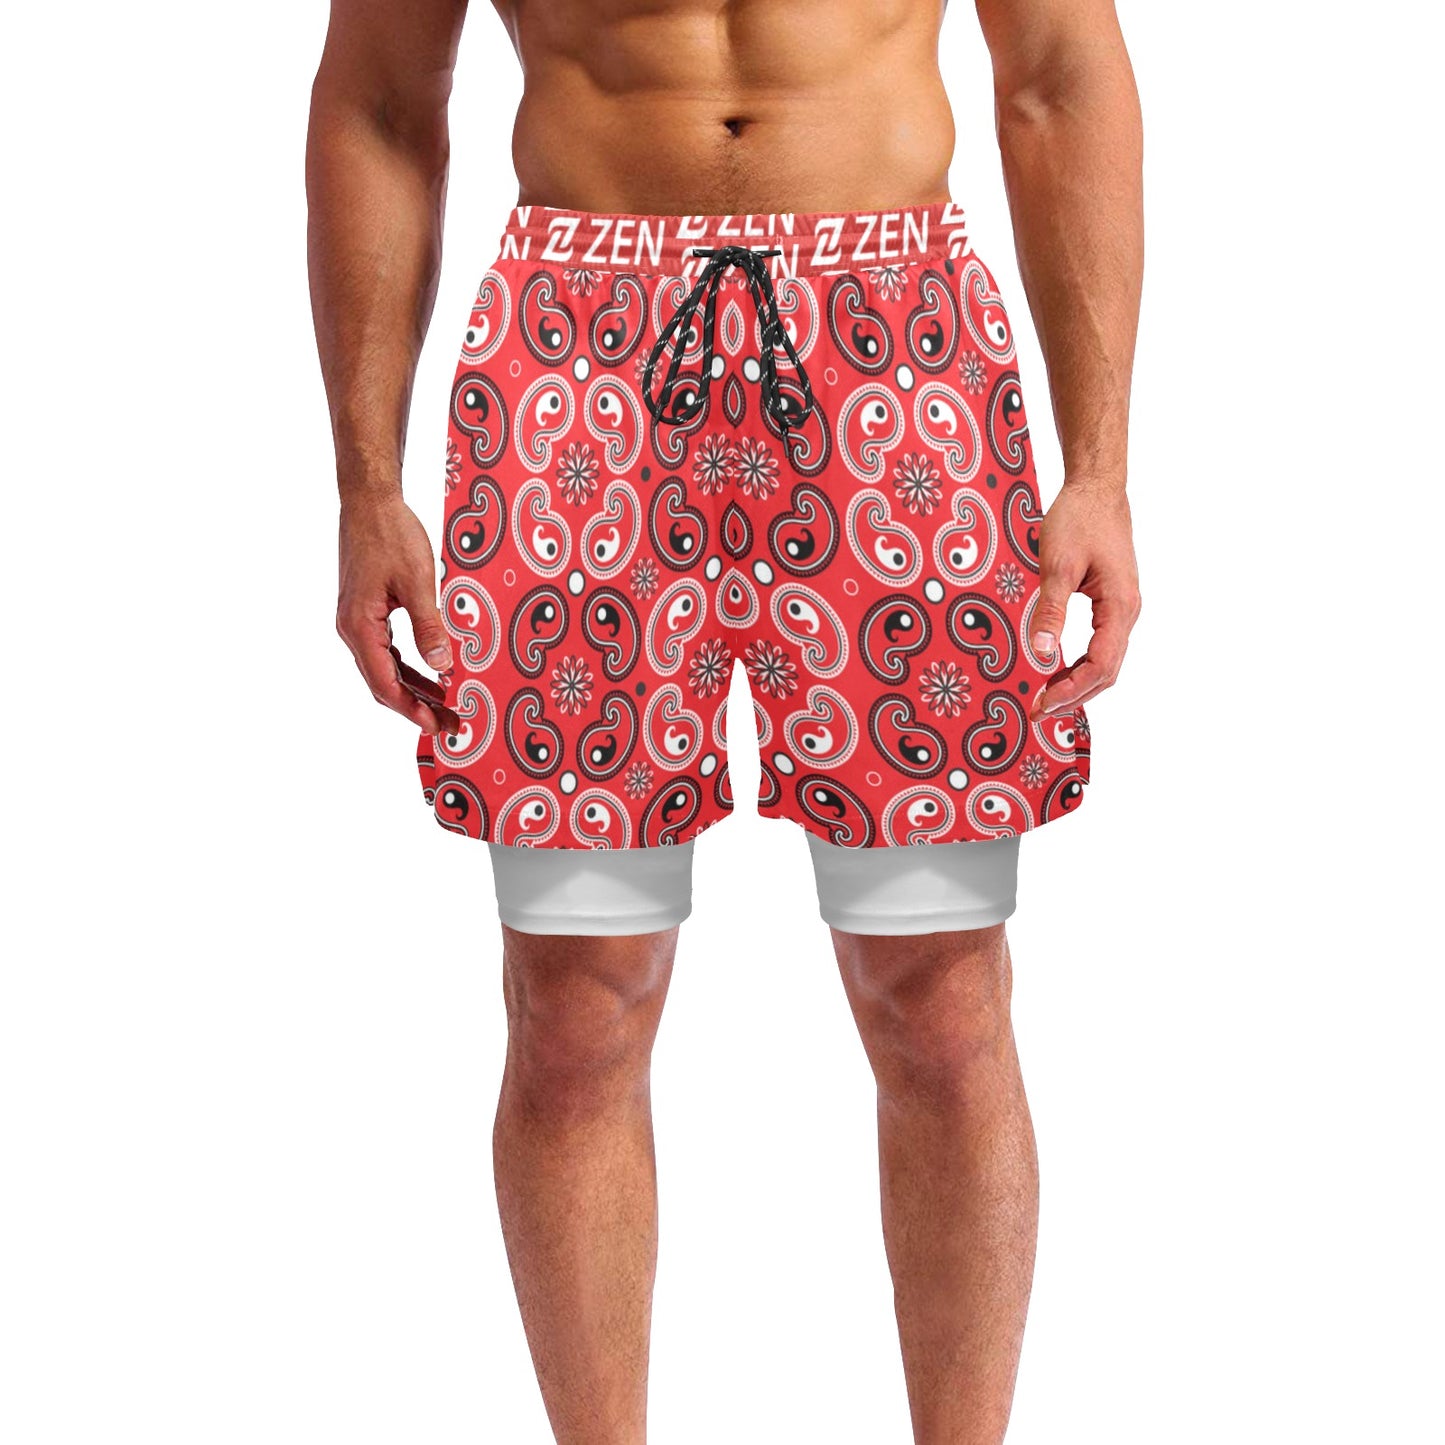 Zen Shorts with Liner - Red Bandana